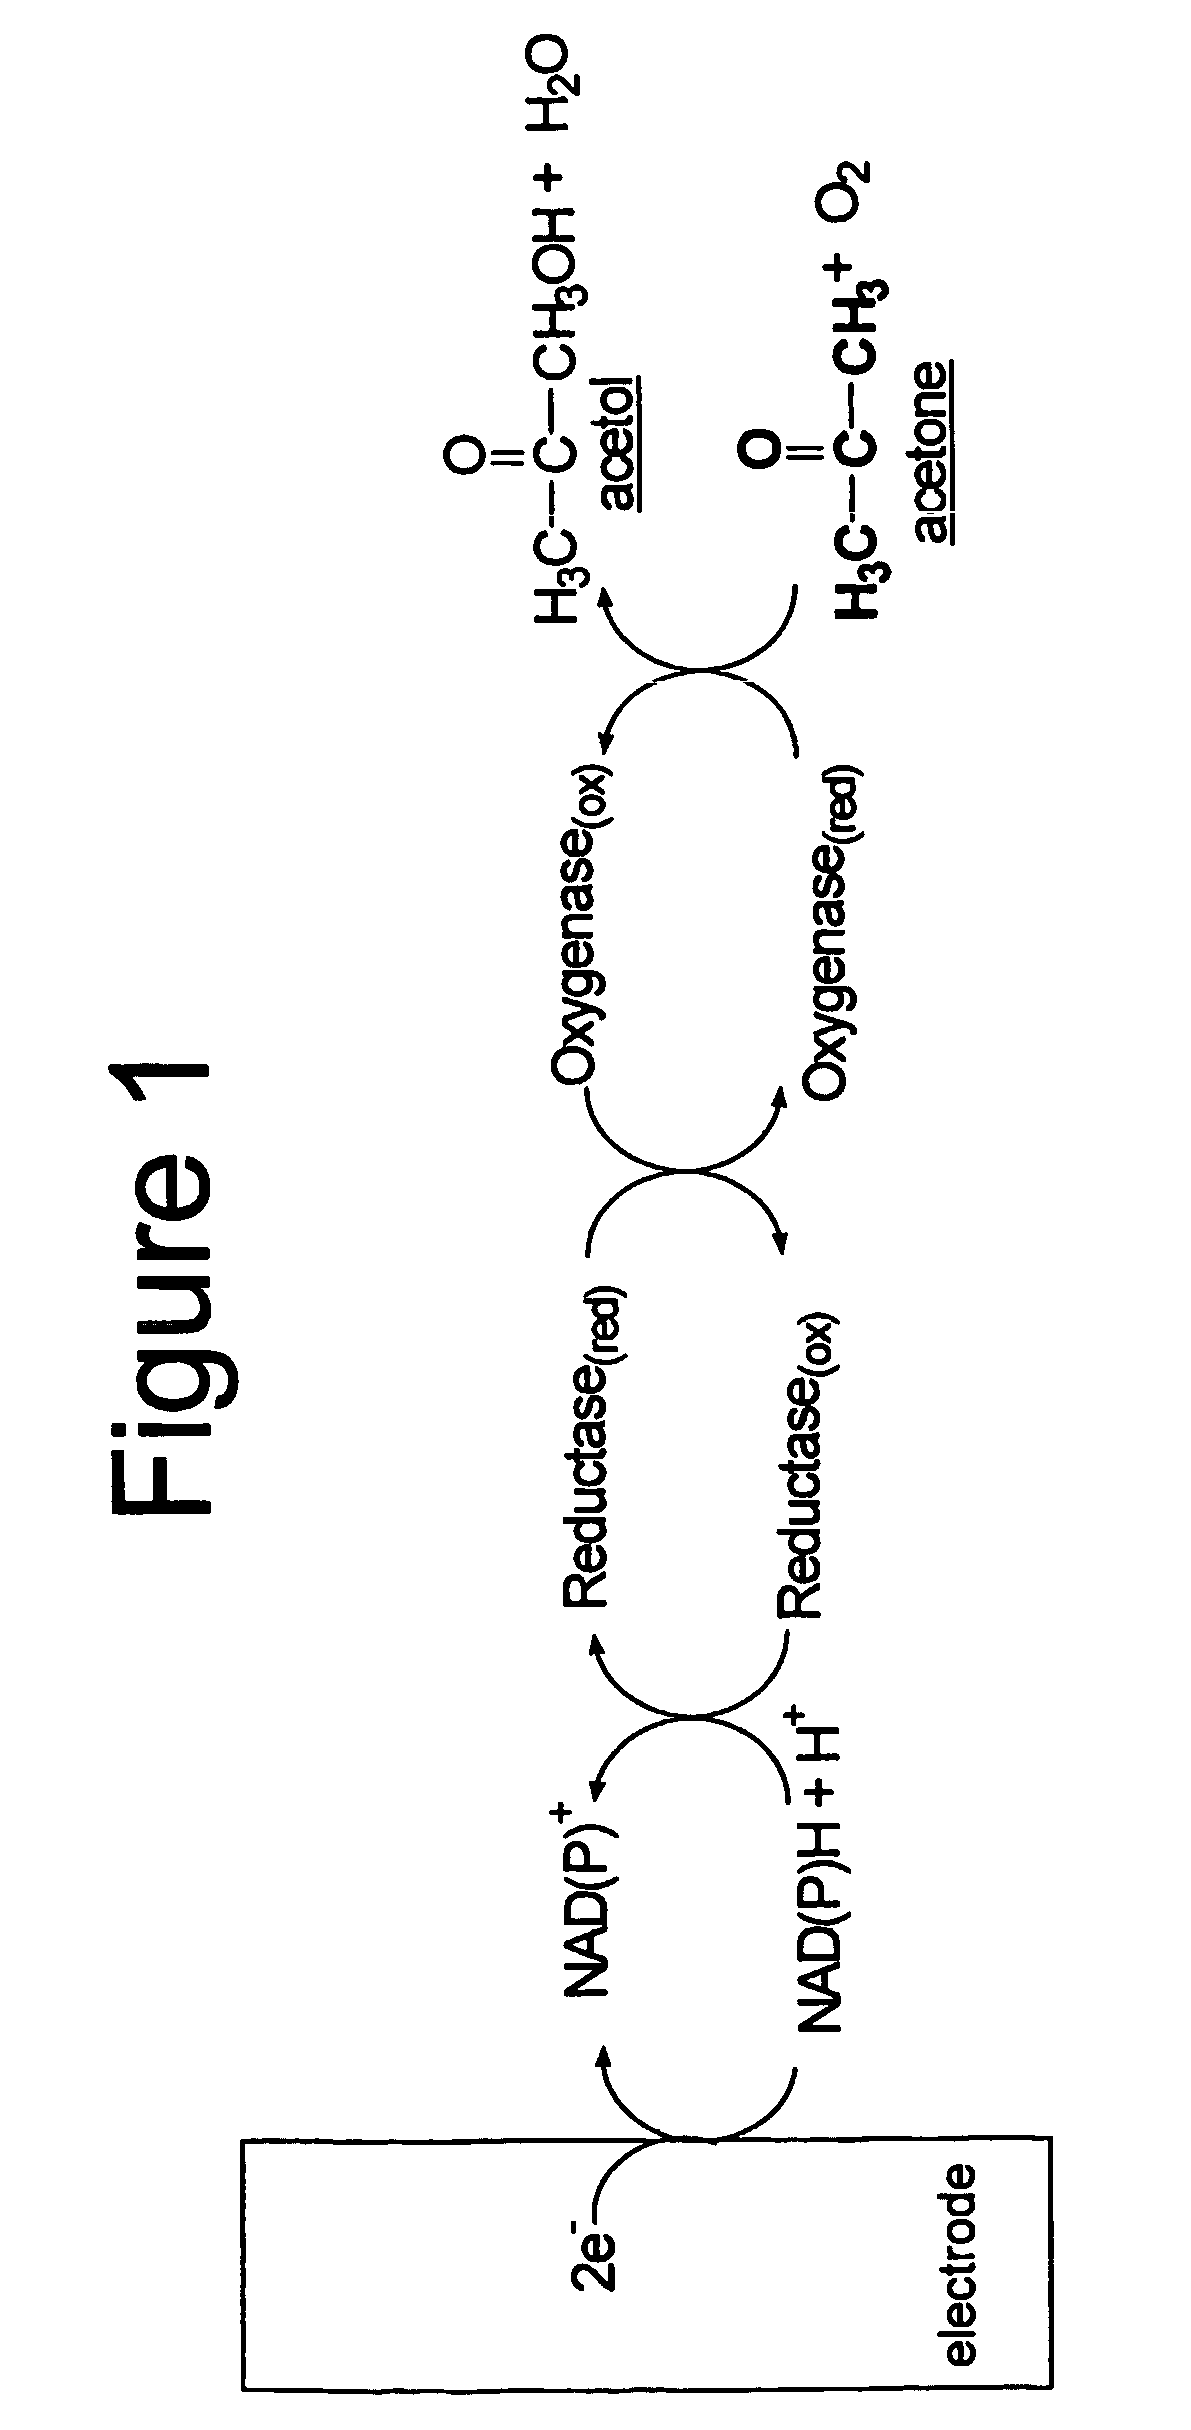 Enzyme-based system and sensor for measuring acetone